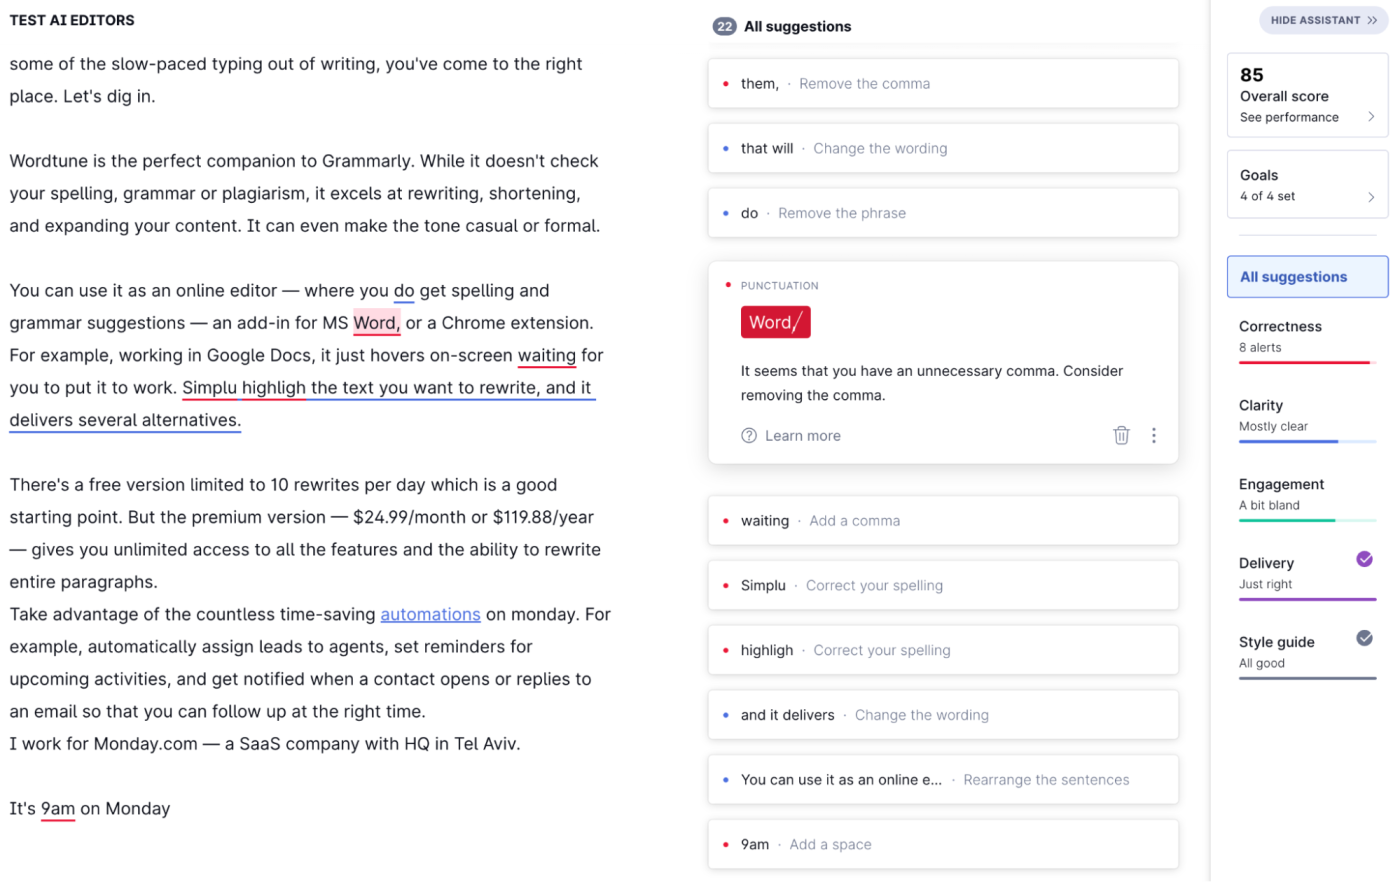 Grammarly, our pick for the best AI grammar checker overall